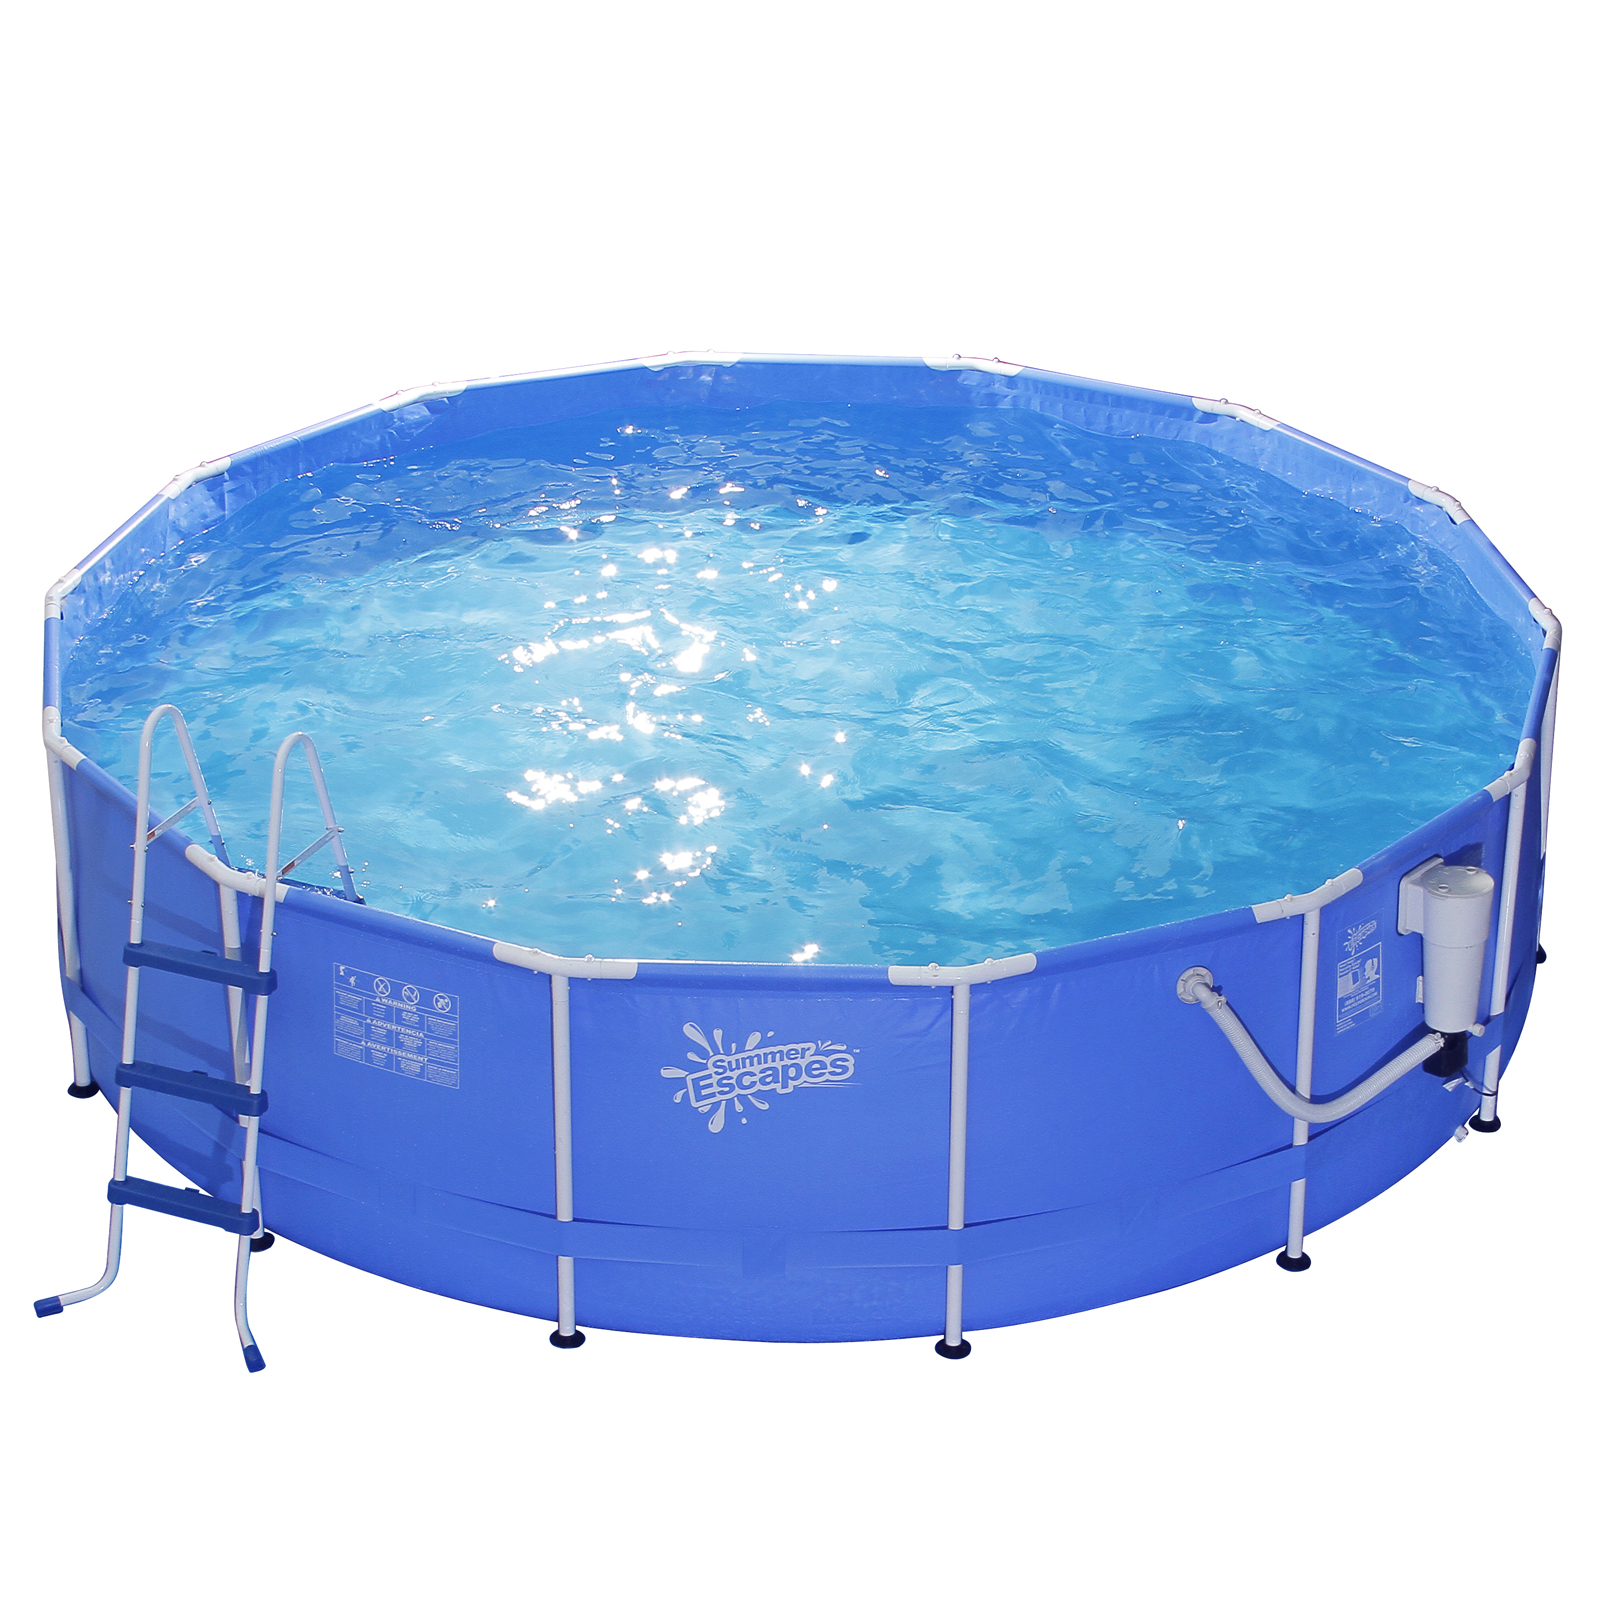 Summer Escapes 14 ft. X 42 in. Metal Frame Pool Set: Pool Fun at Kmart